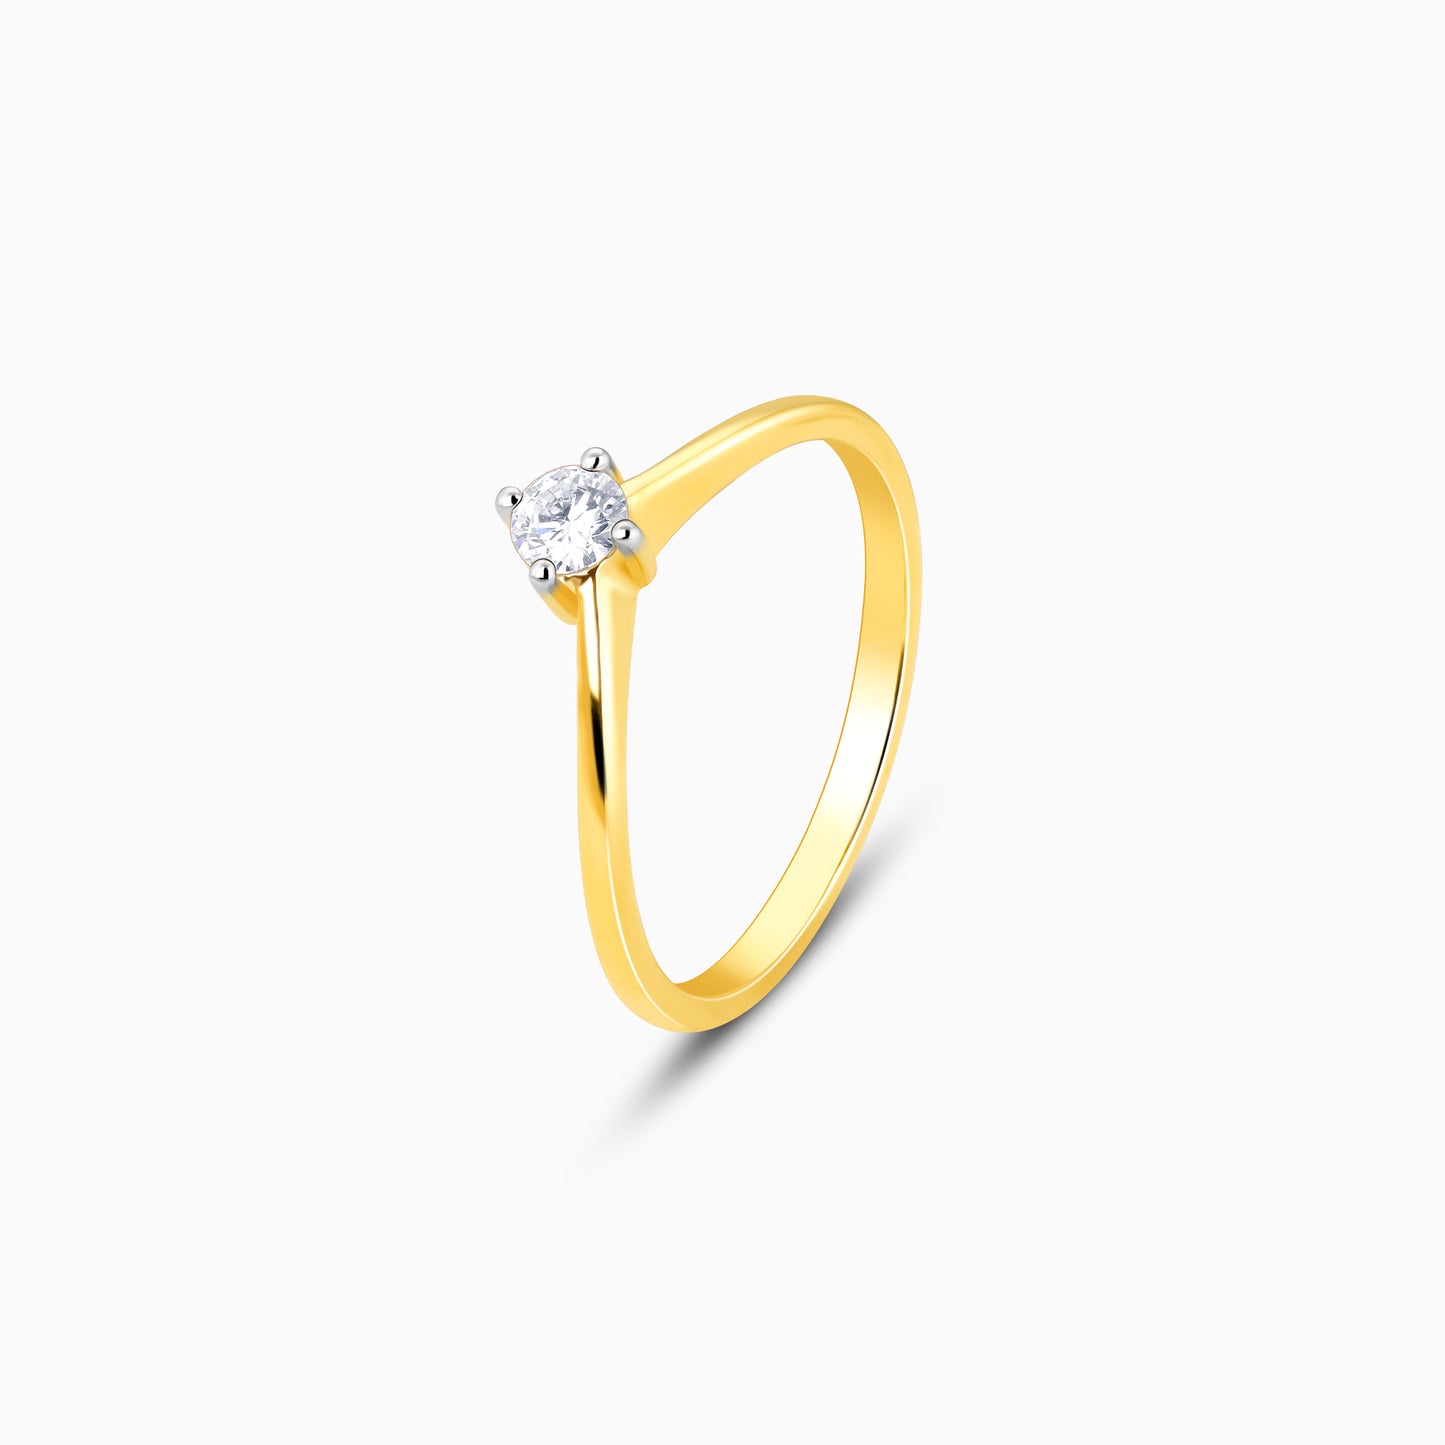 Gold Classic Twinkle Solitaire Diamond Ring